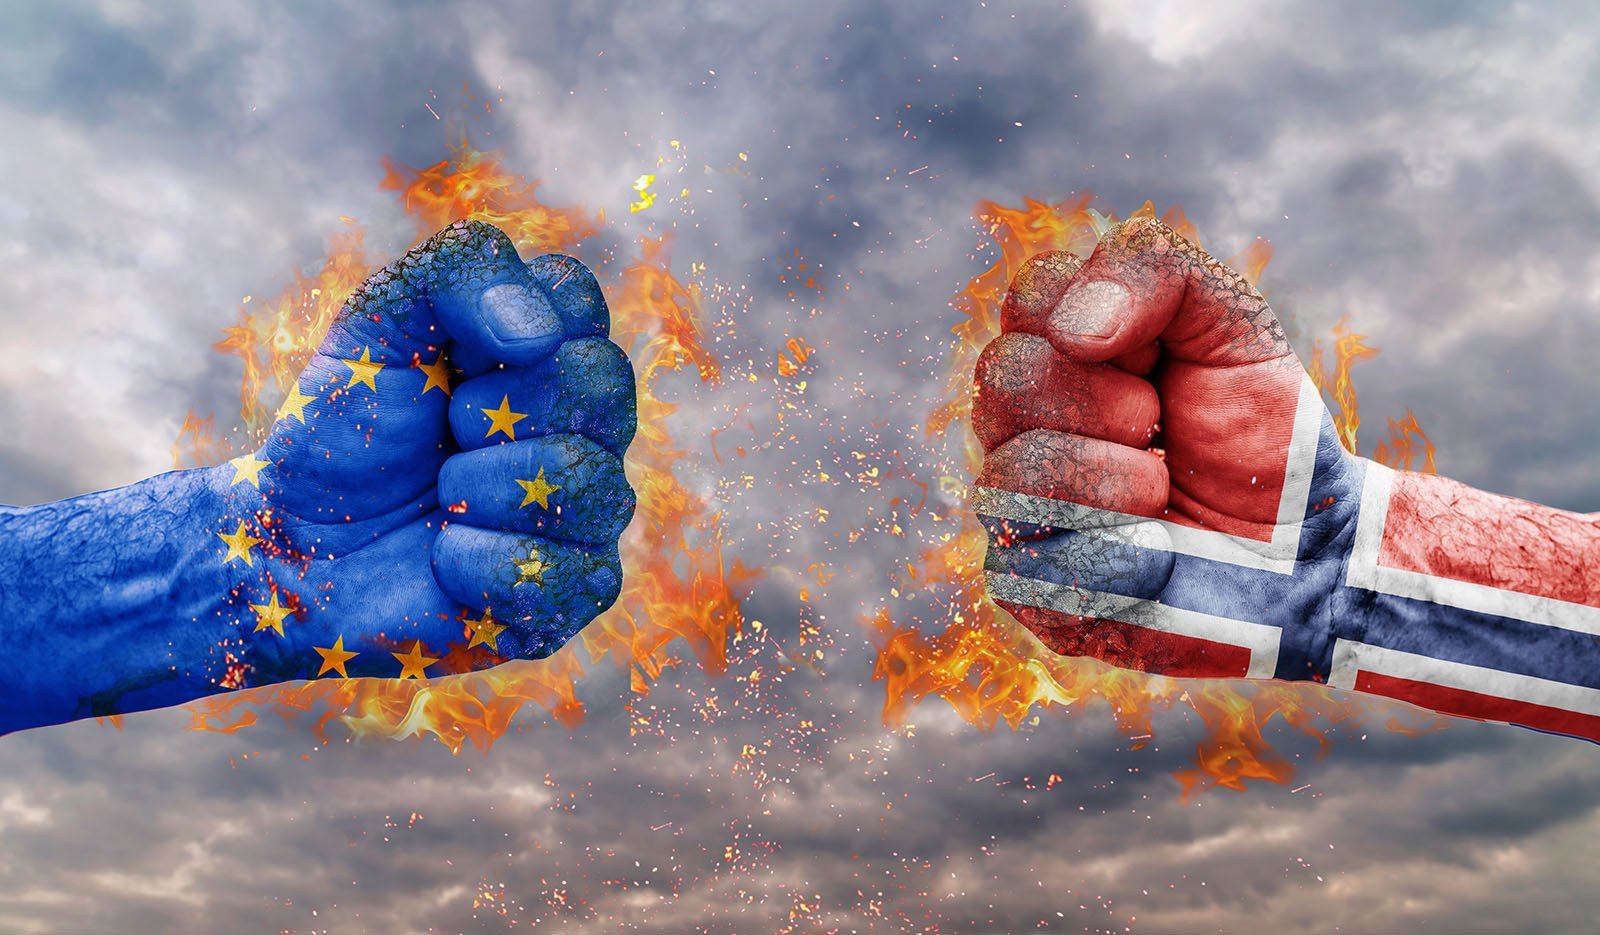 Norway and the EU image